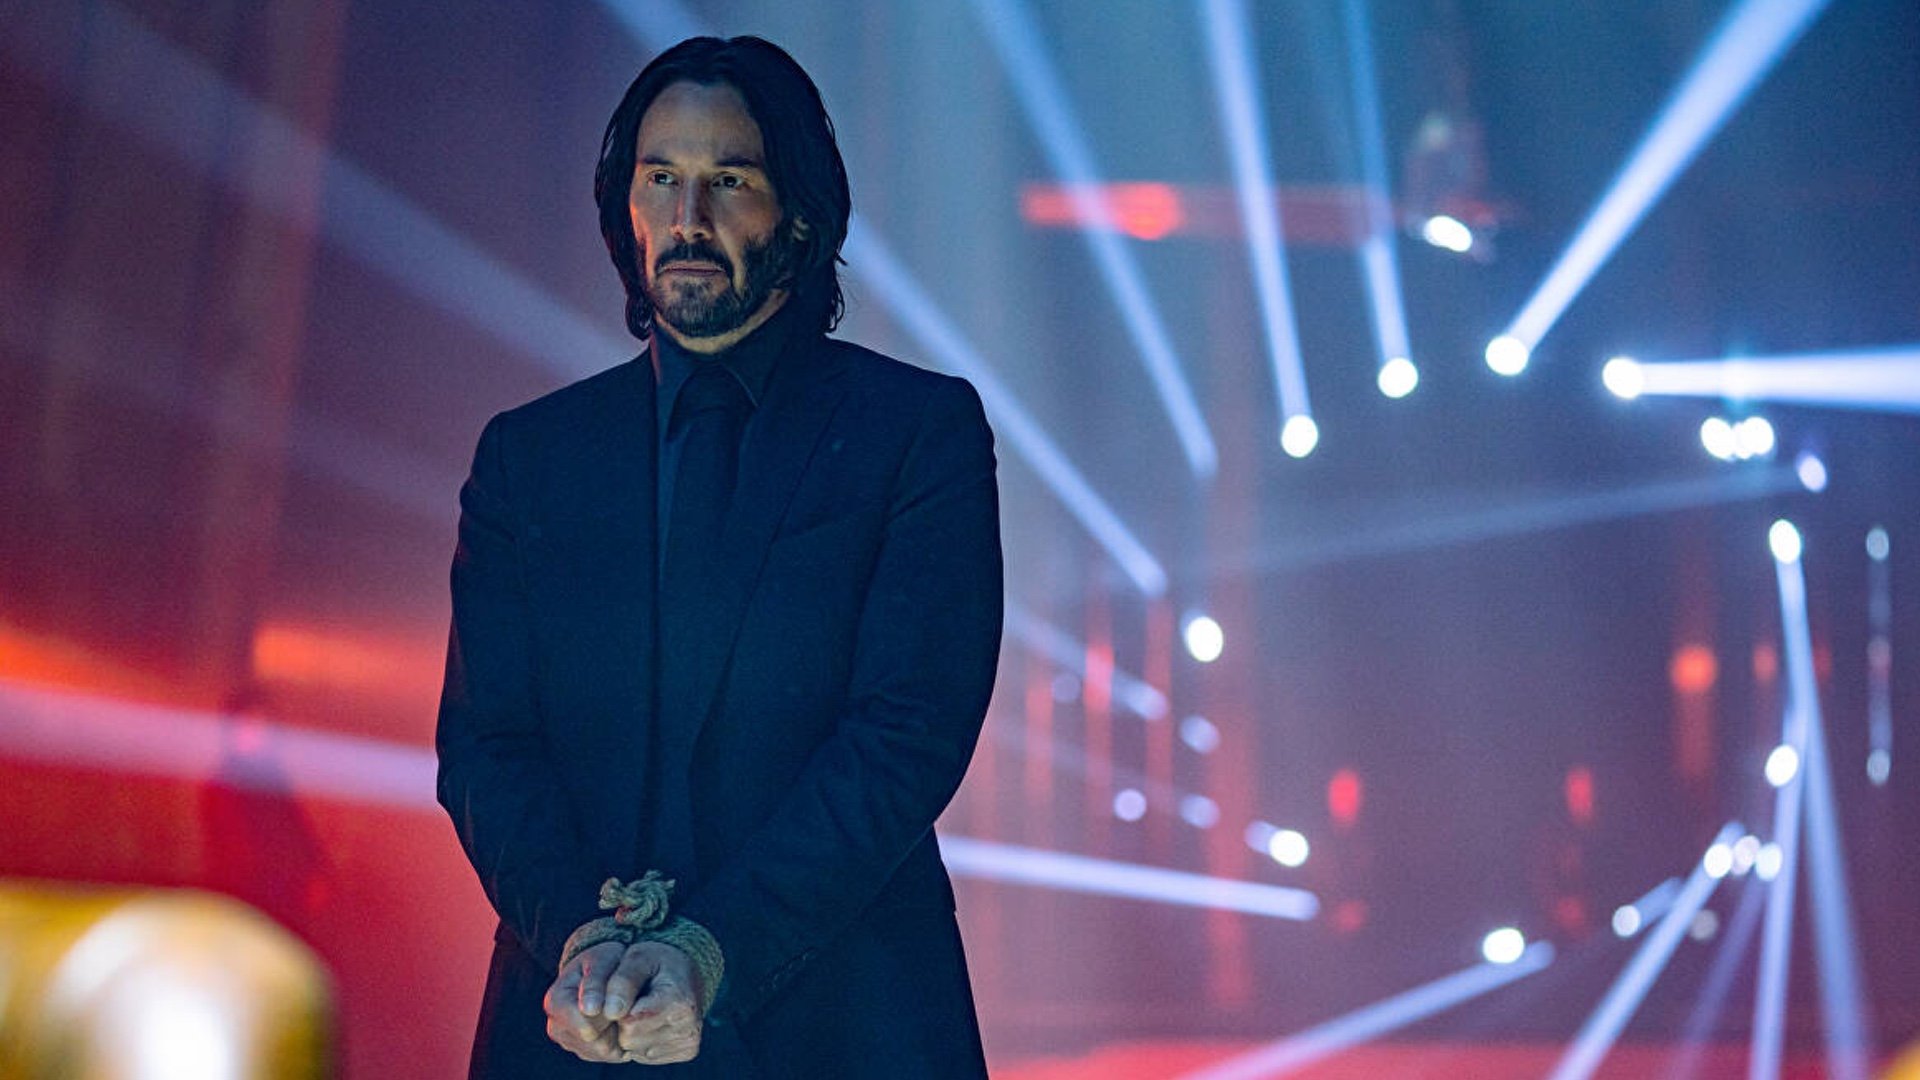 John Wick Producer Says the Fifth Film Needs to Reinvent the Story